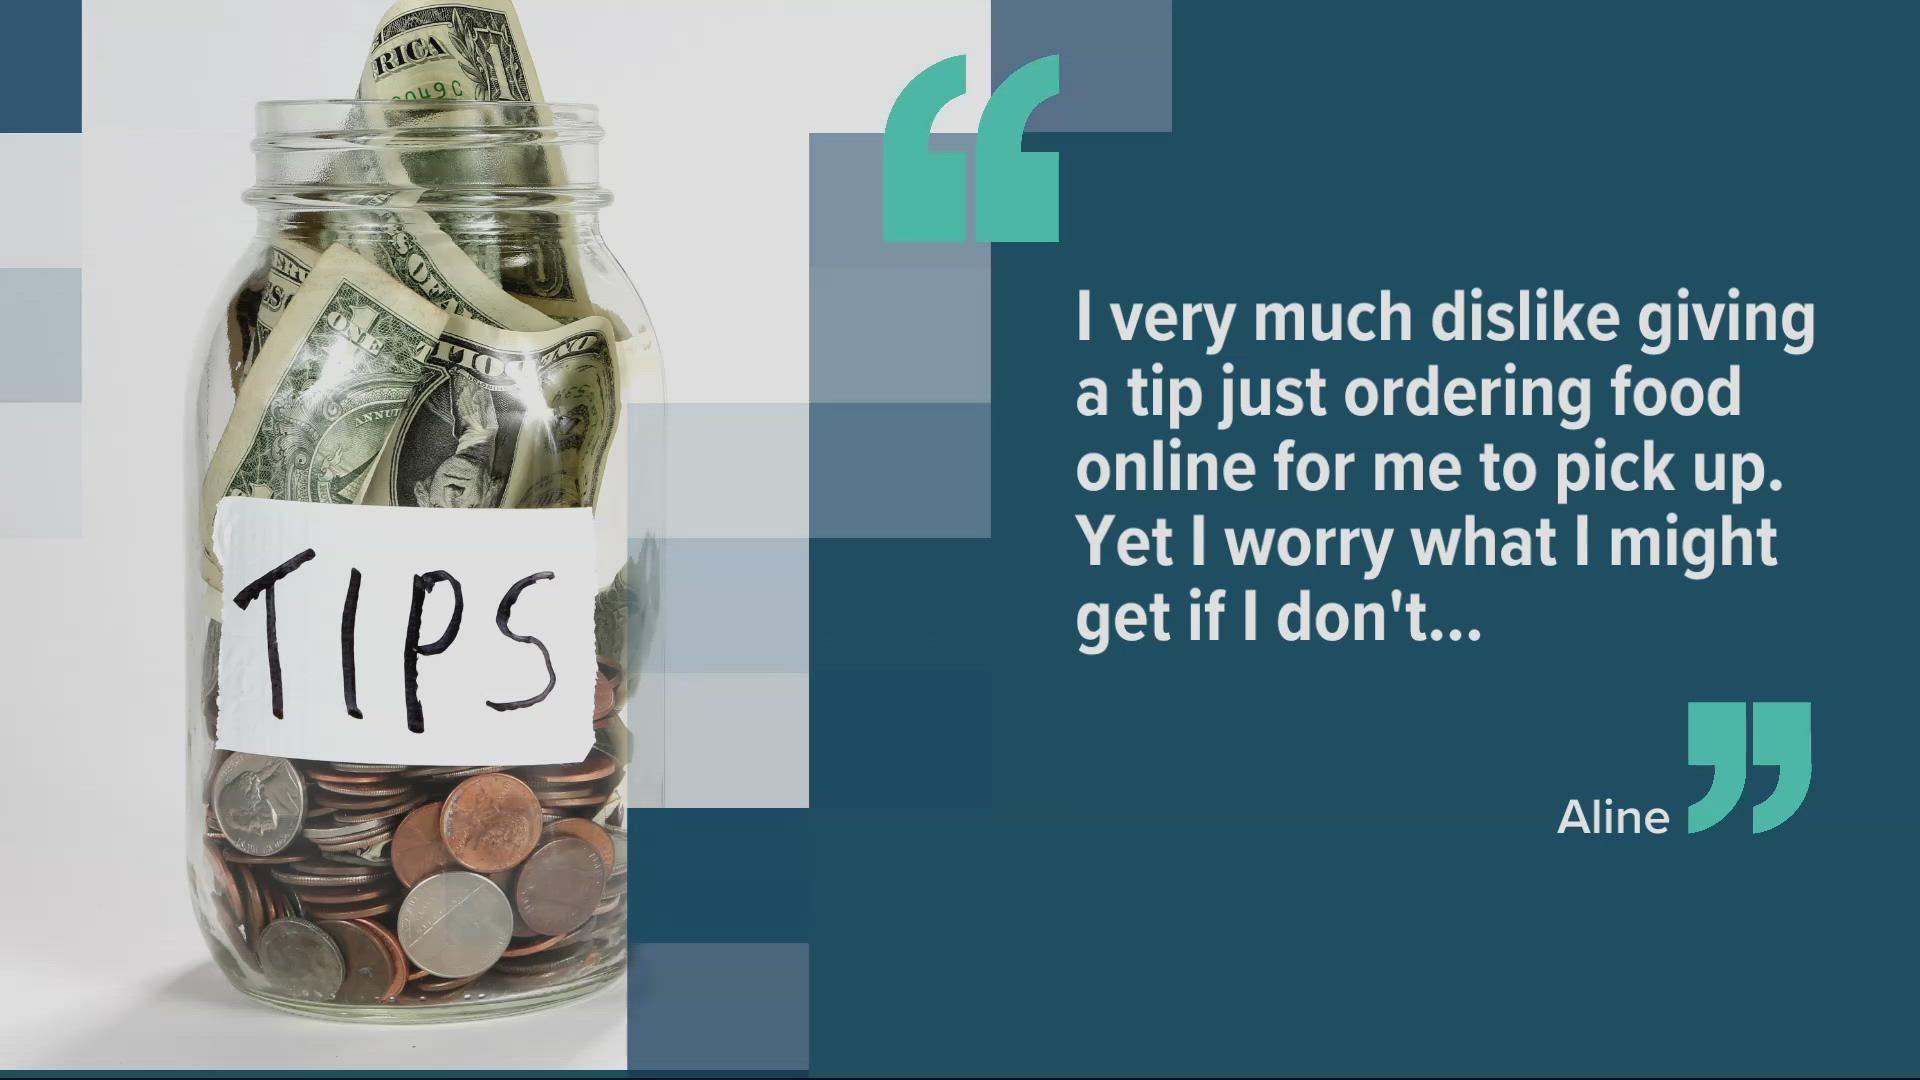 On Thursday, we talked about tipping — how much, when and for what service you should tip these days. Here’s what you had to say about it.